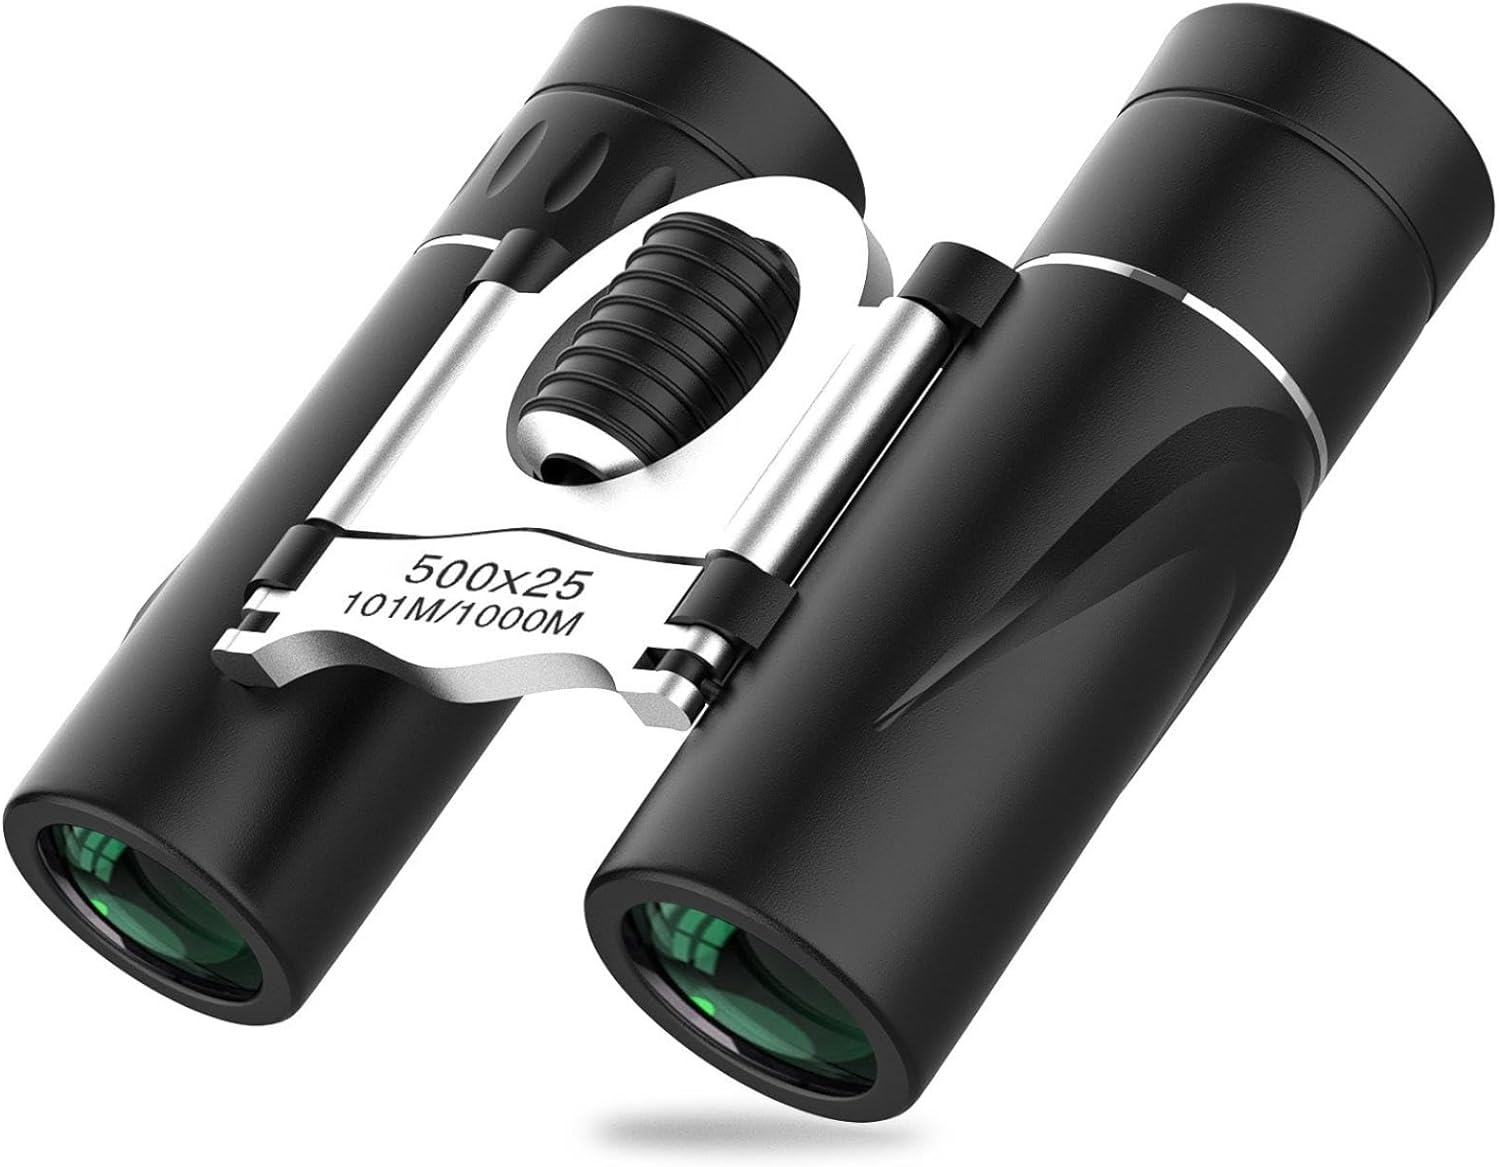 Zoom Binoculars, High Definition Low- Night Vision Travel Folding Telescope with Phone Clip,Clear Optics, Easy to Focus, Portable for Watching Outdoor, for Kids Adults